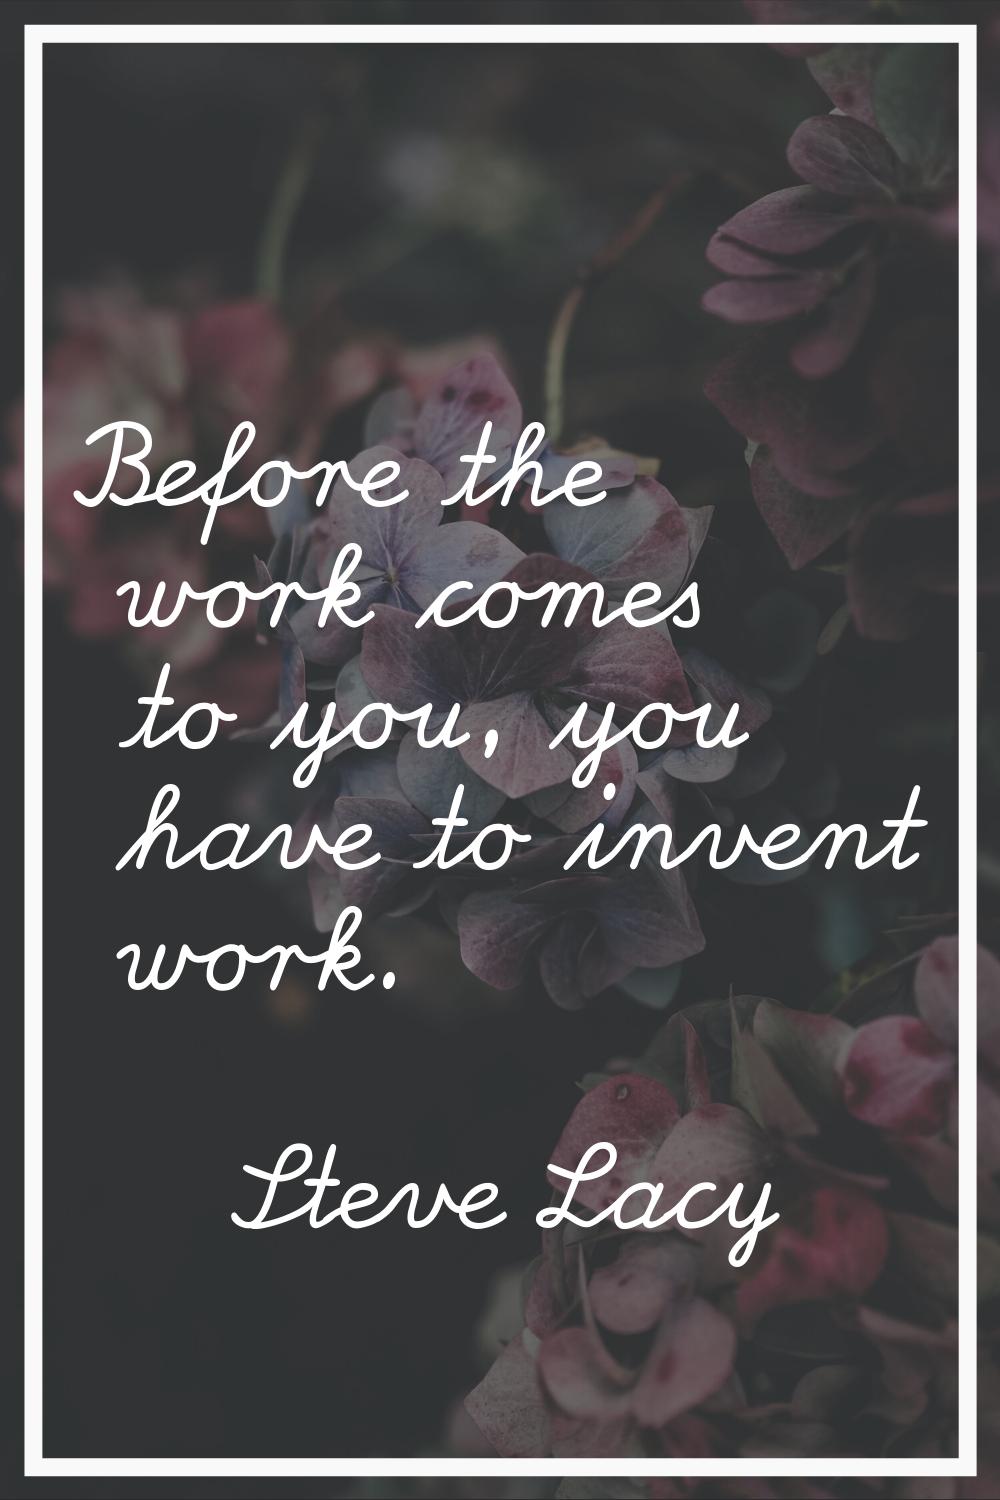 Before the work comes to you, you have to invent work.